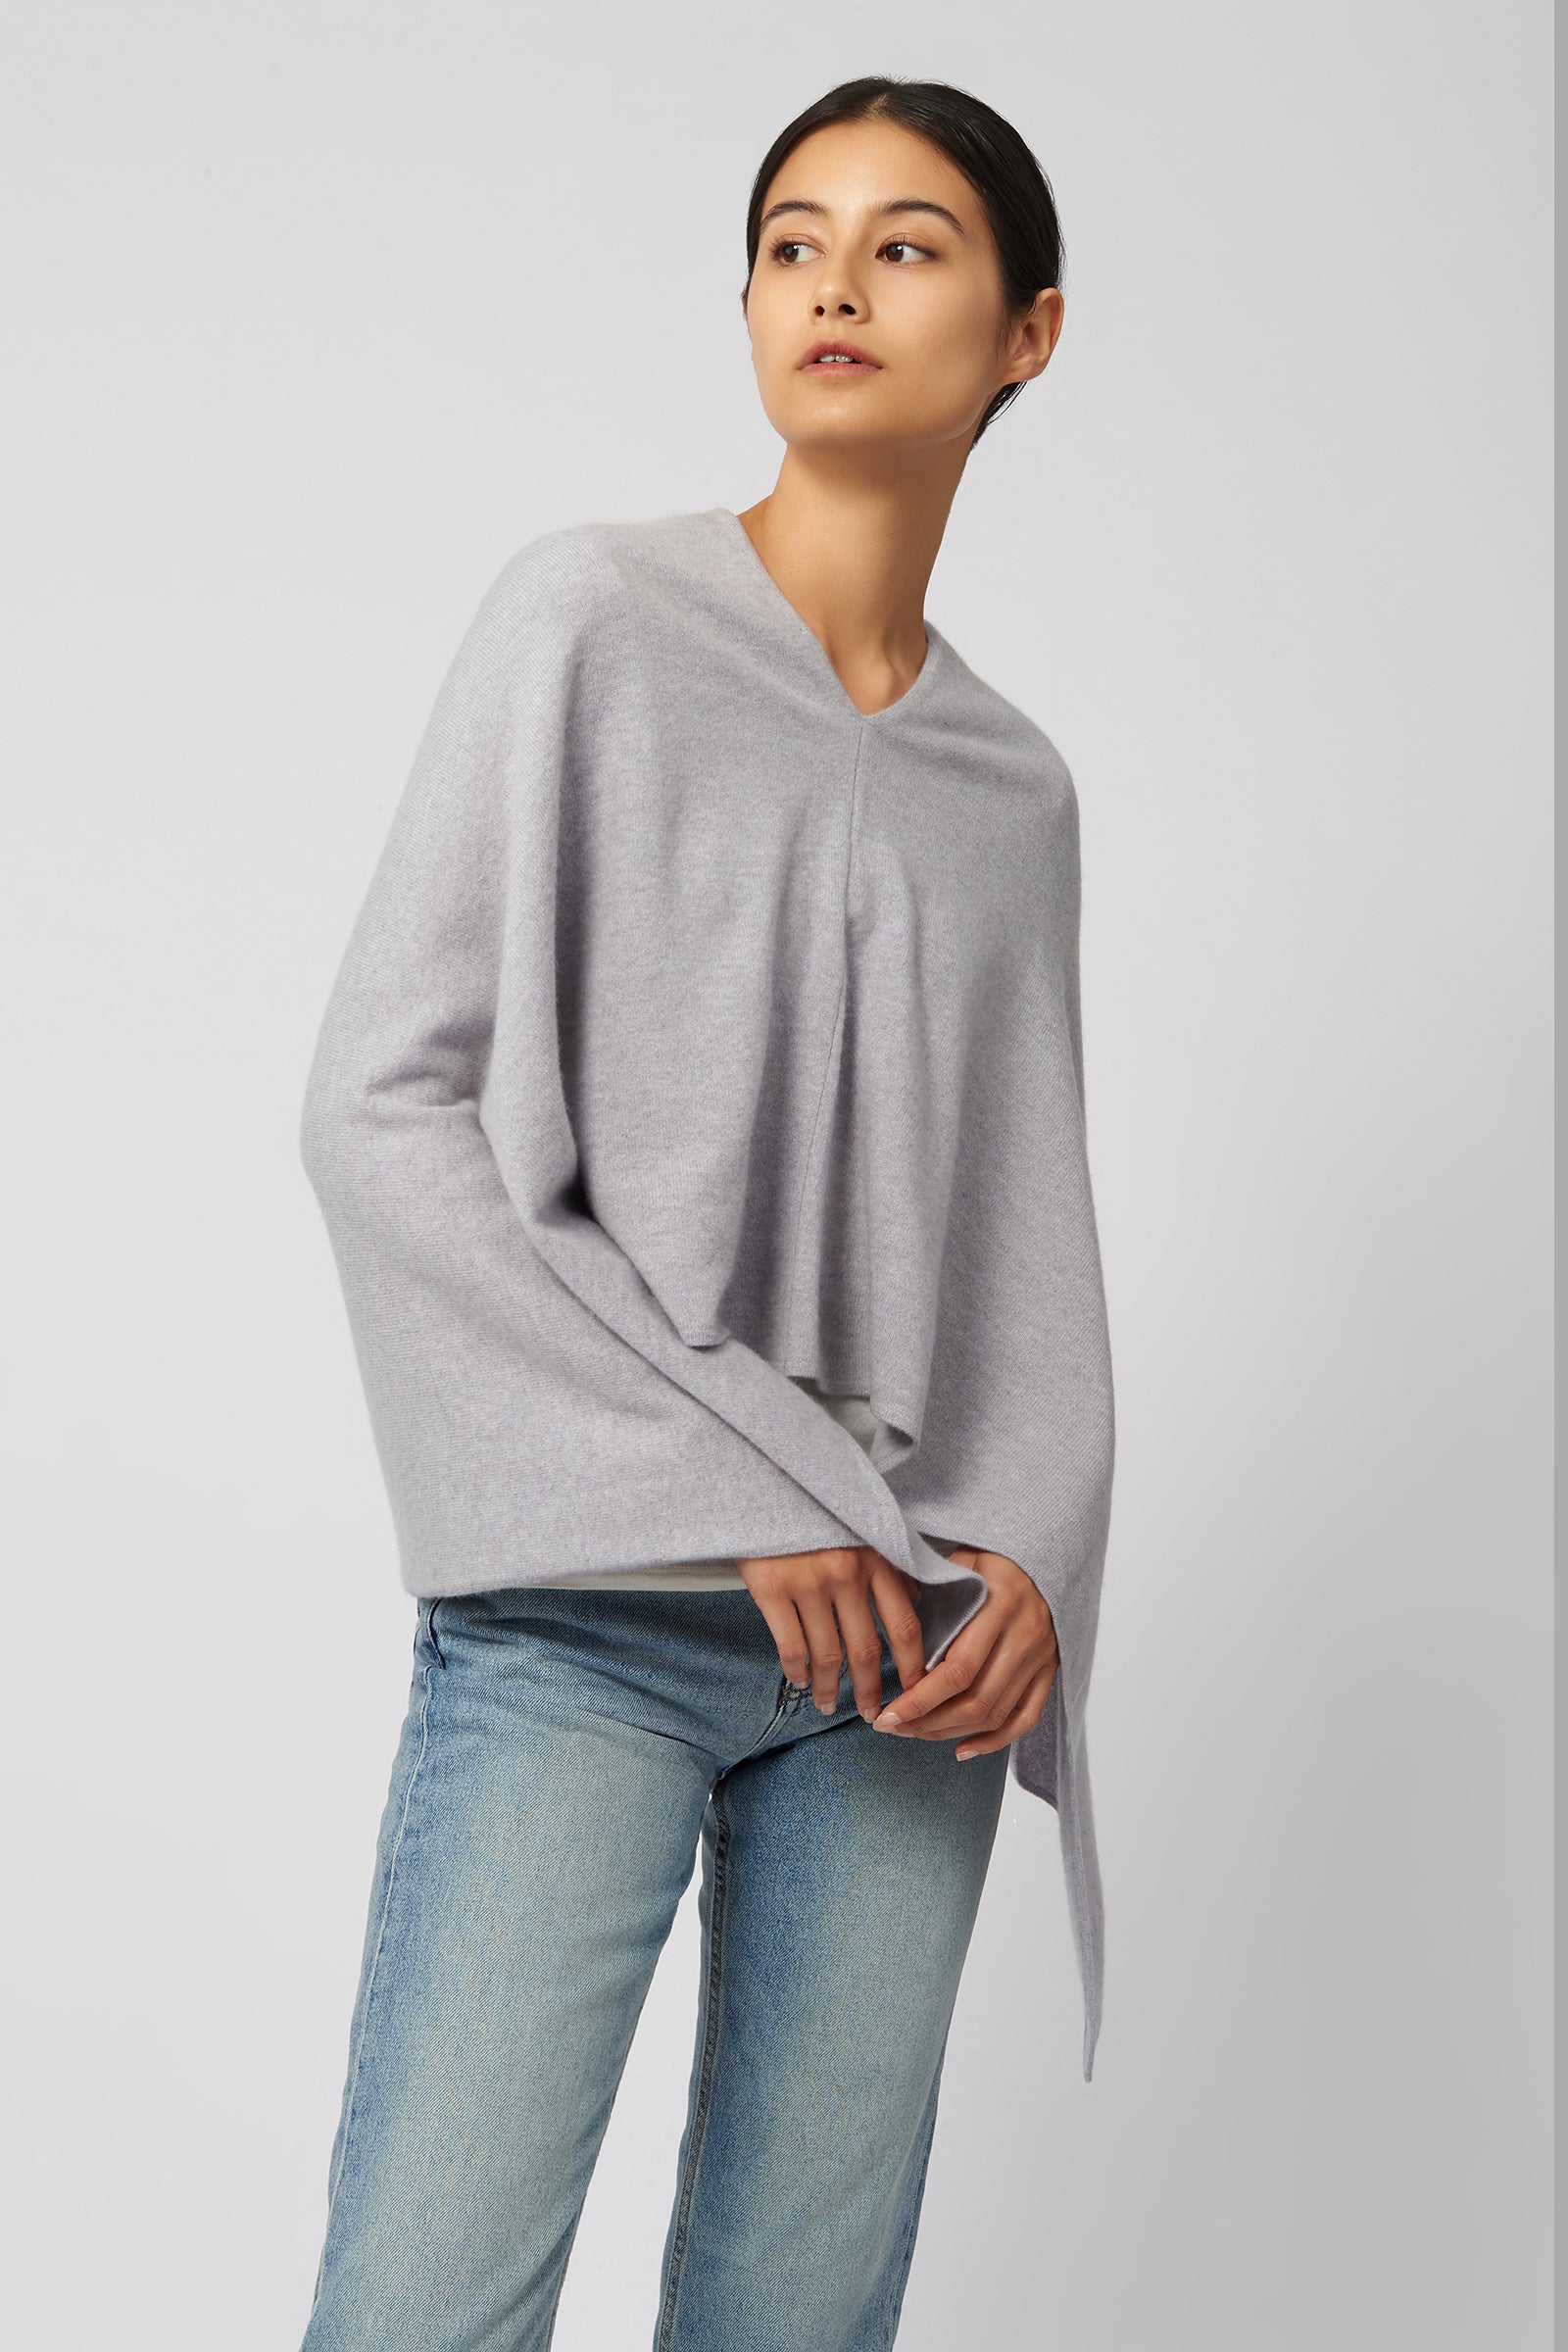 Kal Rieman Cashmere Poncho in Grey Heather on Model Front View